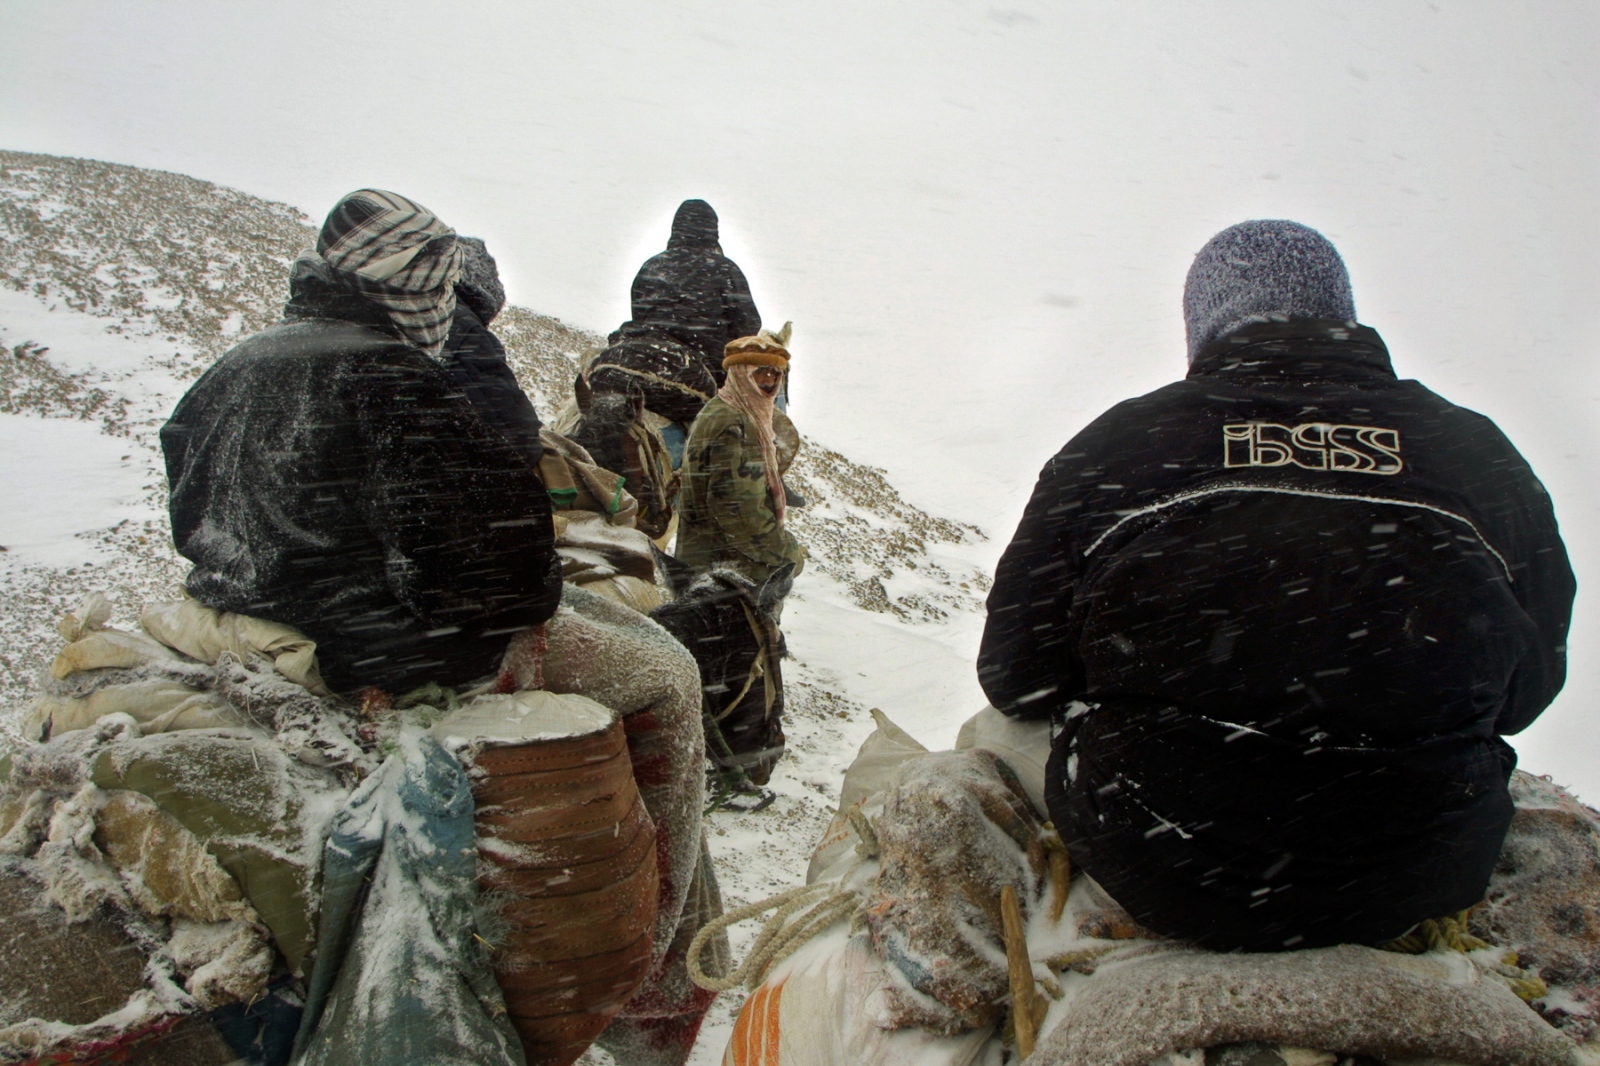 Onward to Kabul - In the blinding storm our guides try to keep us together.